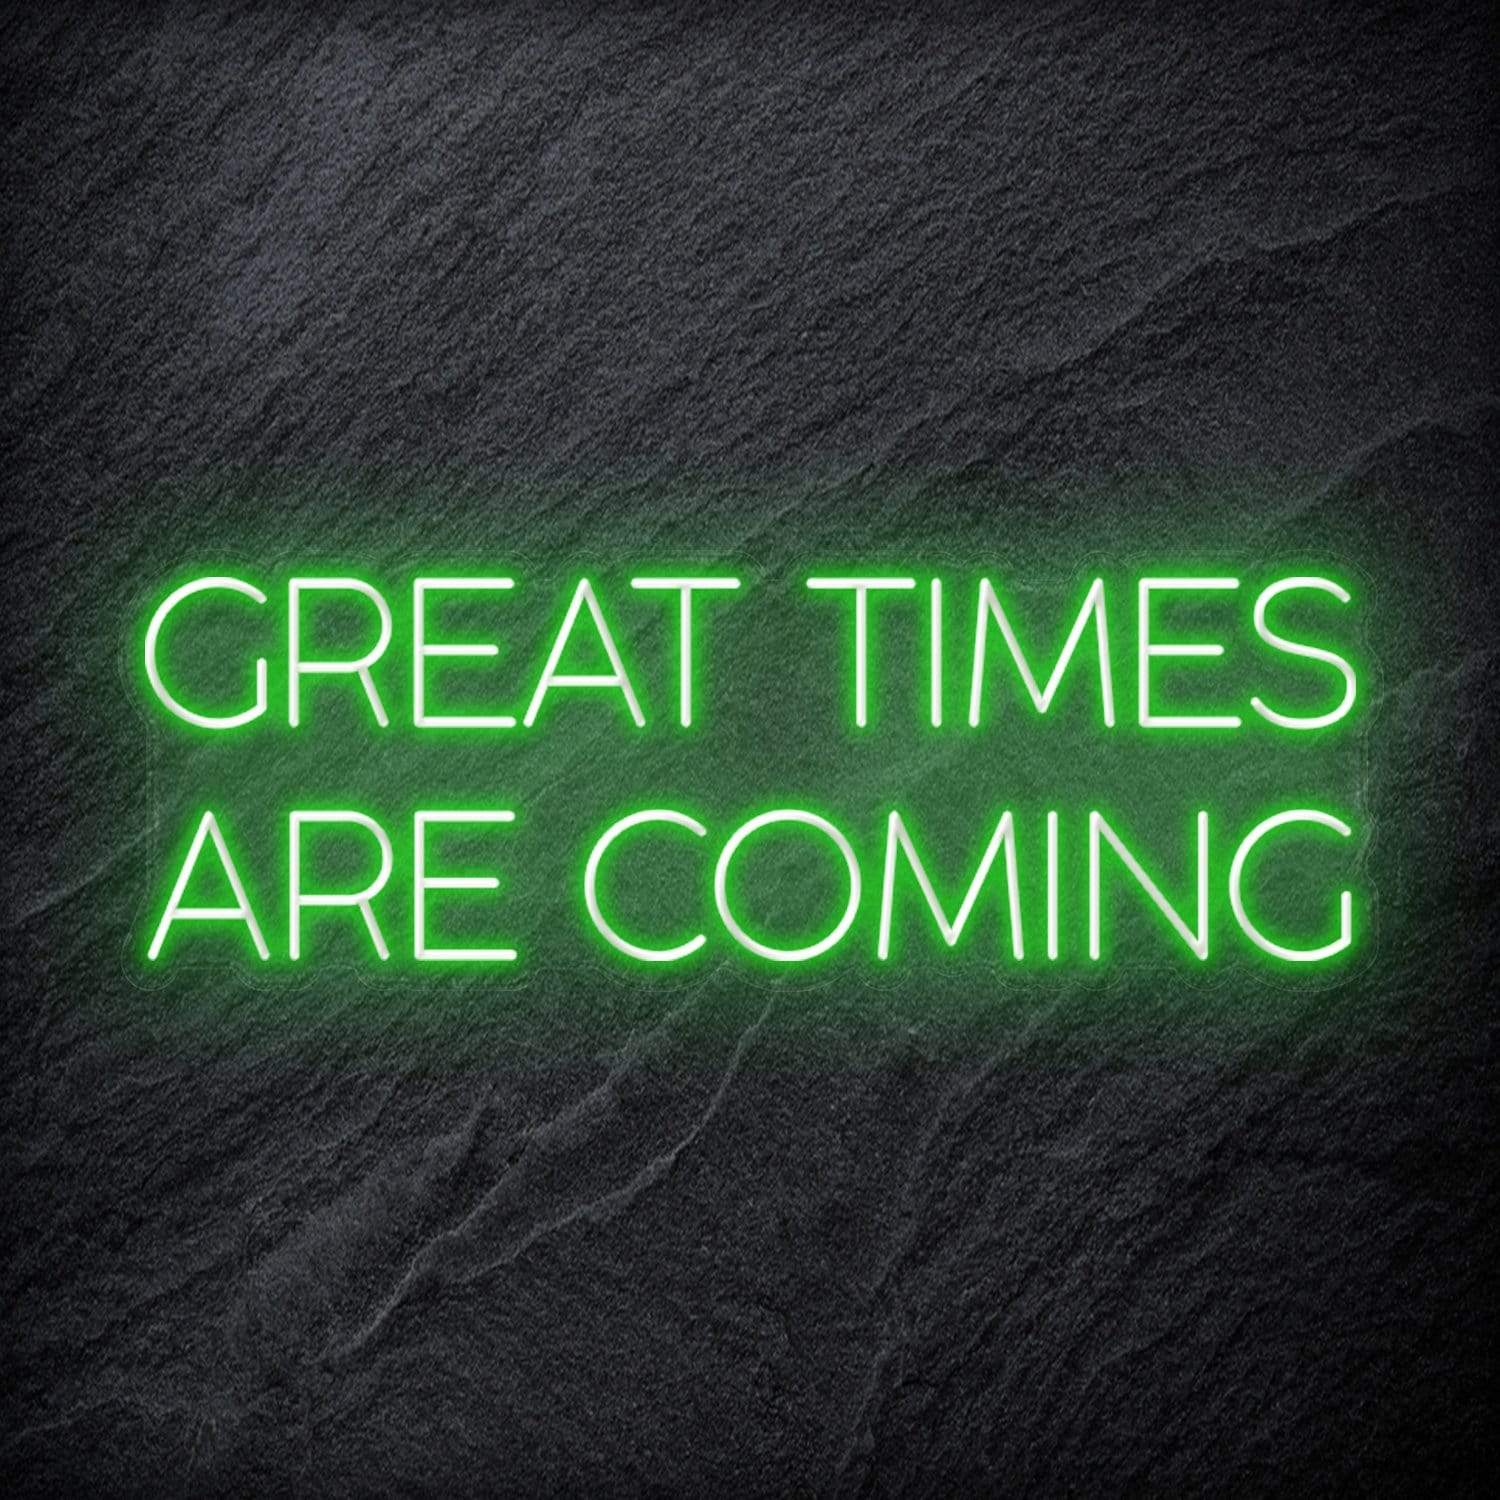 " Great Times Are Coming" LED Neon Schriftzug Sign - NEONEVERGLOW